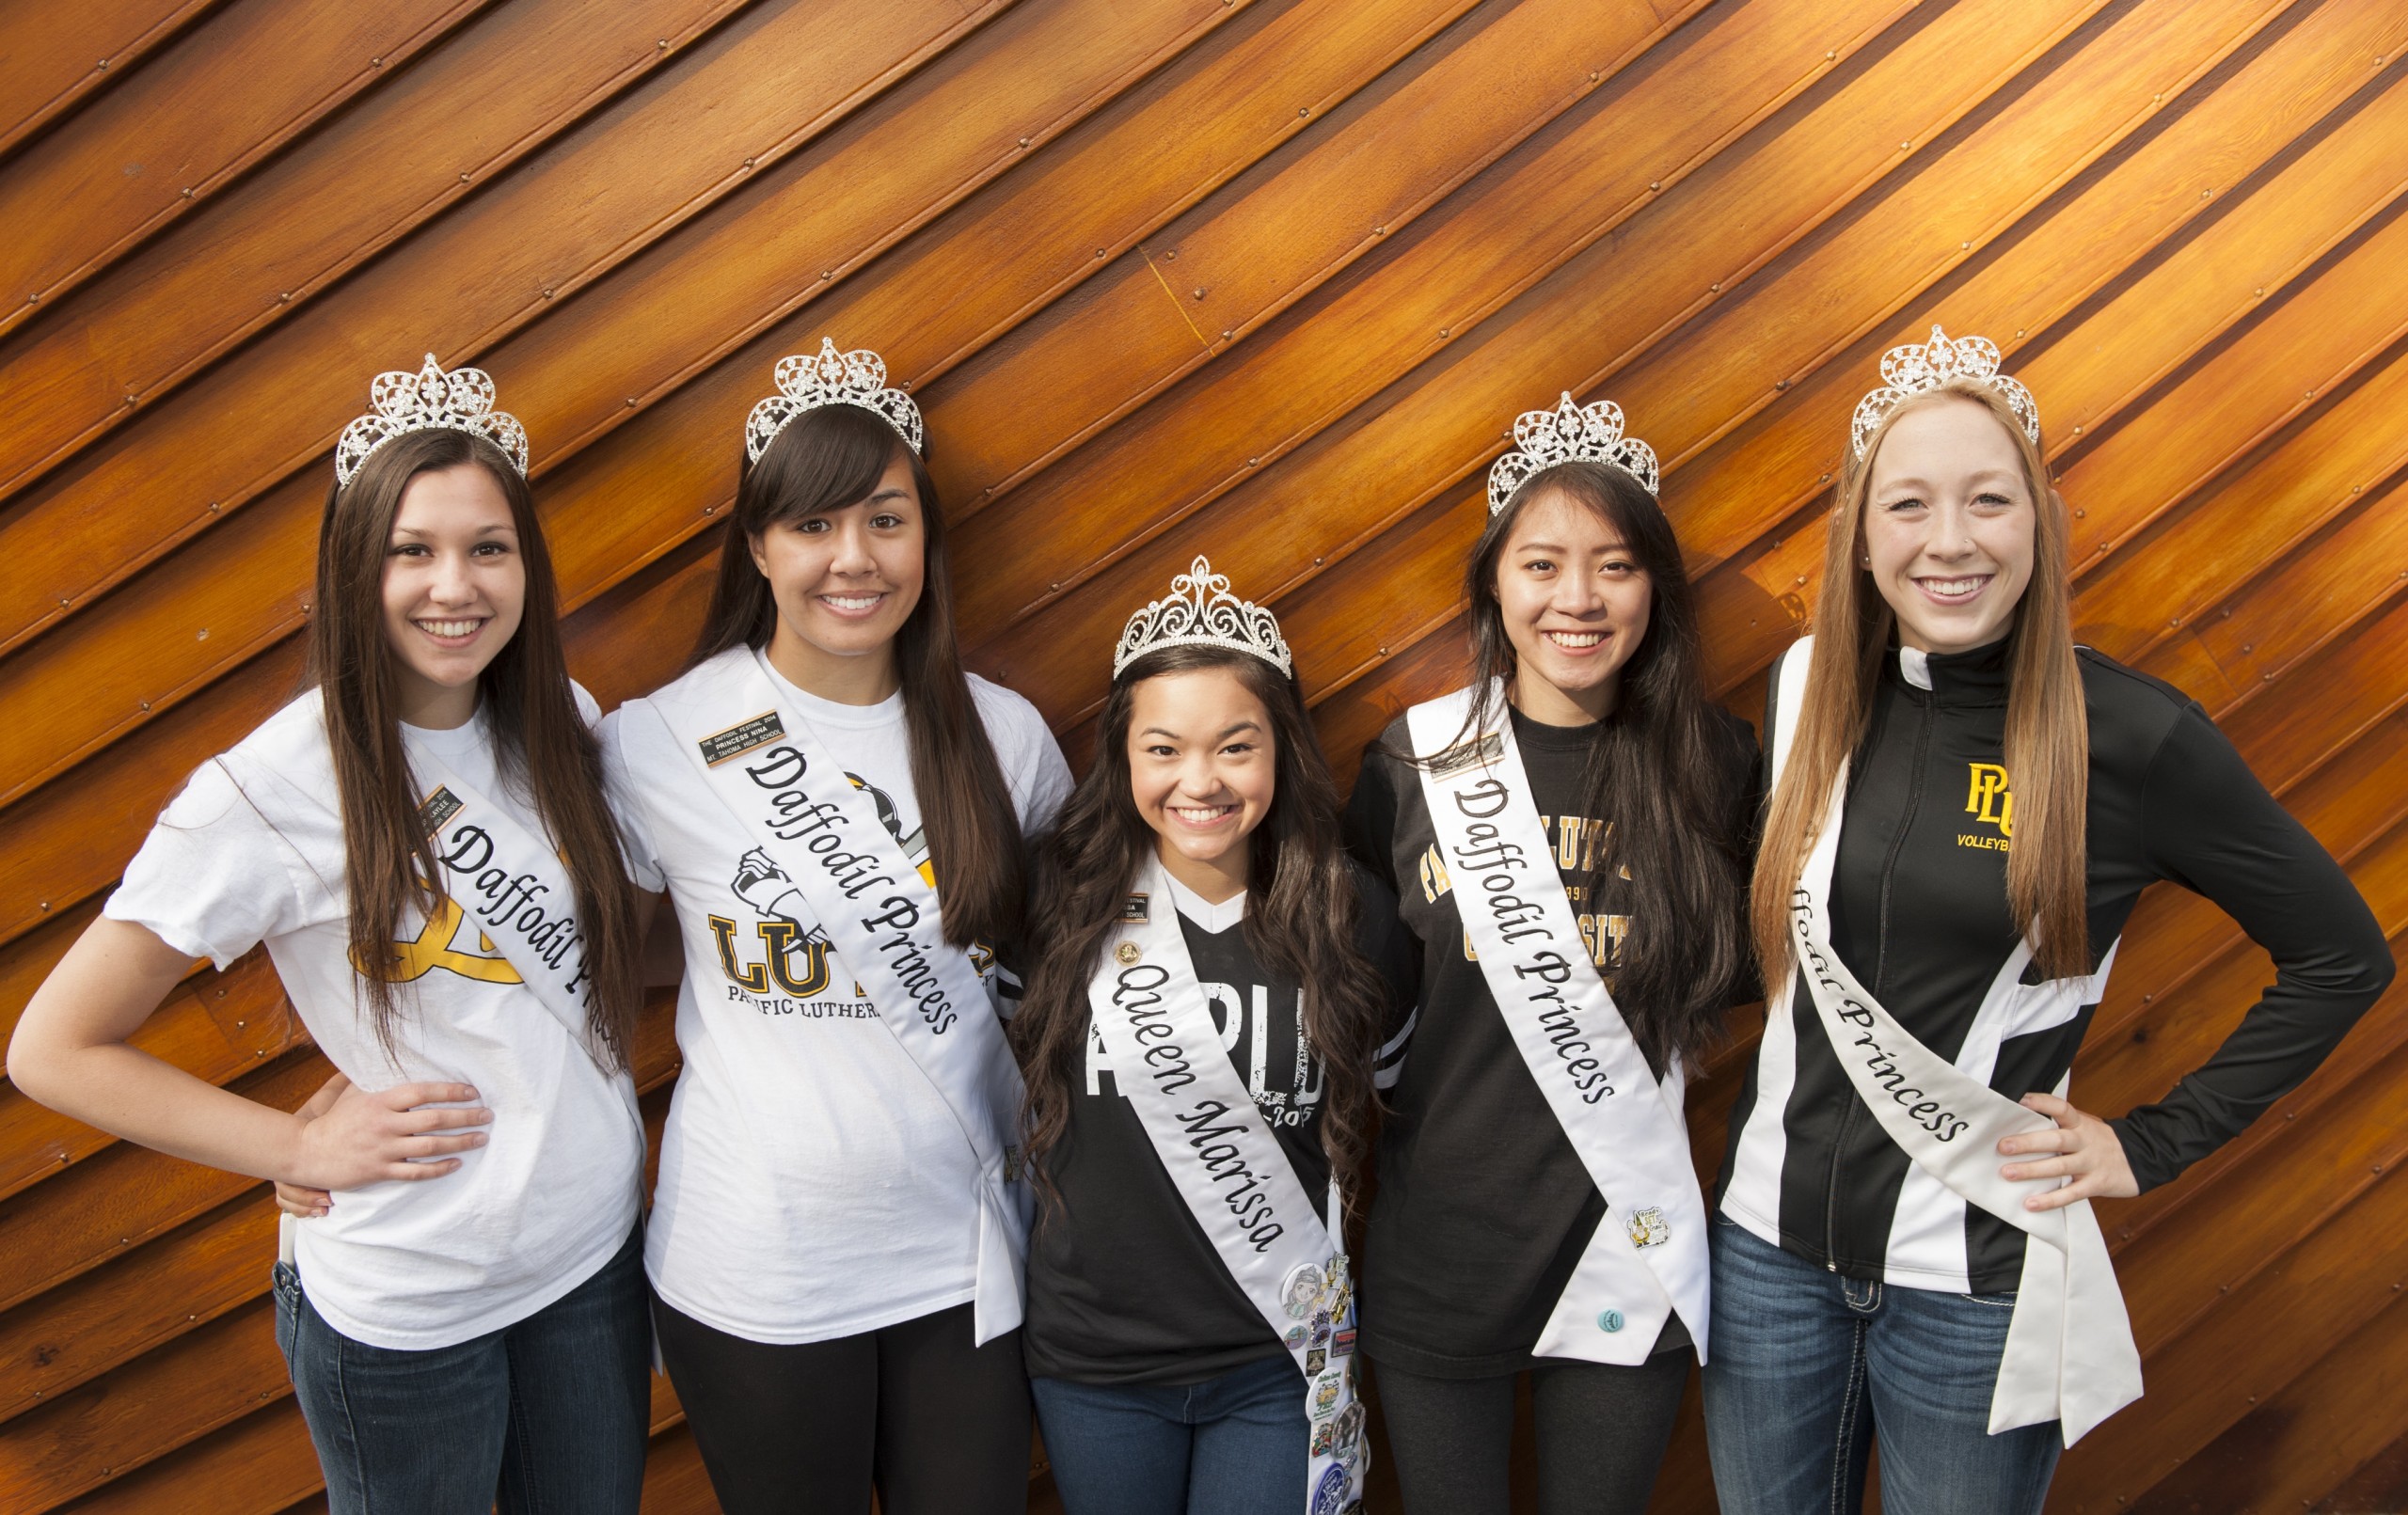 Five members of the 2014 Pierce County Royal Daffodil Court are all new Lutes this fall. From left: KayLee Weist, Nina Thach, Marissa Modestowicz (queen), Ji Larson and Kaetlynn Brown. (Photo: John Struzenberg ’16)